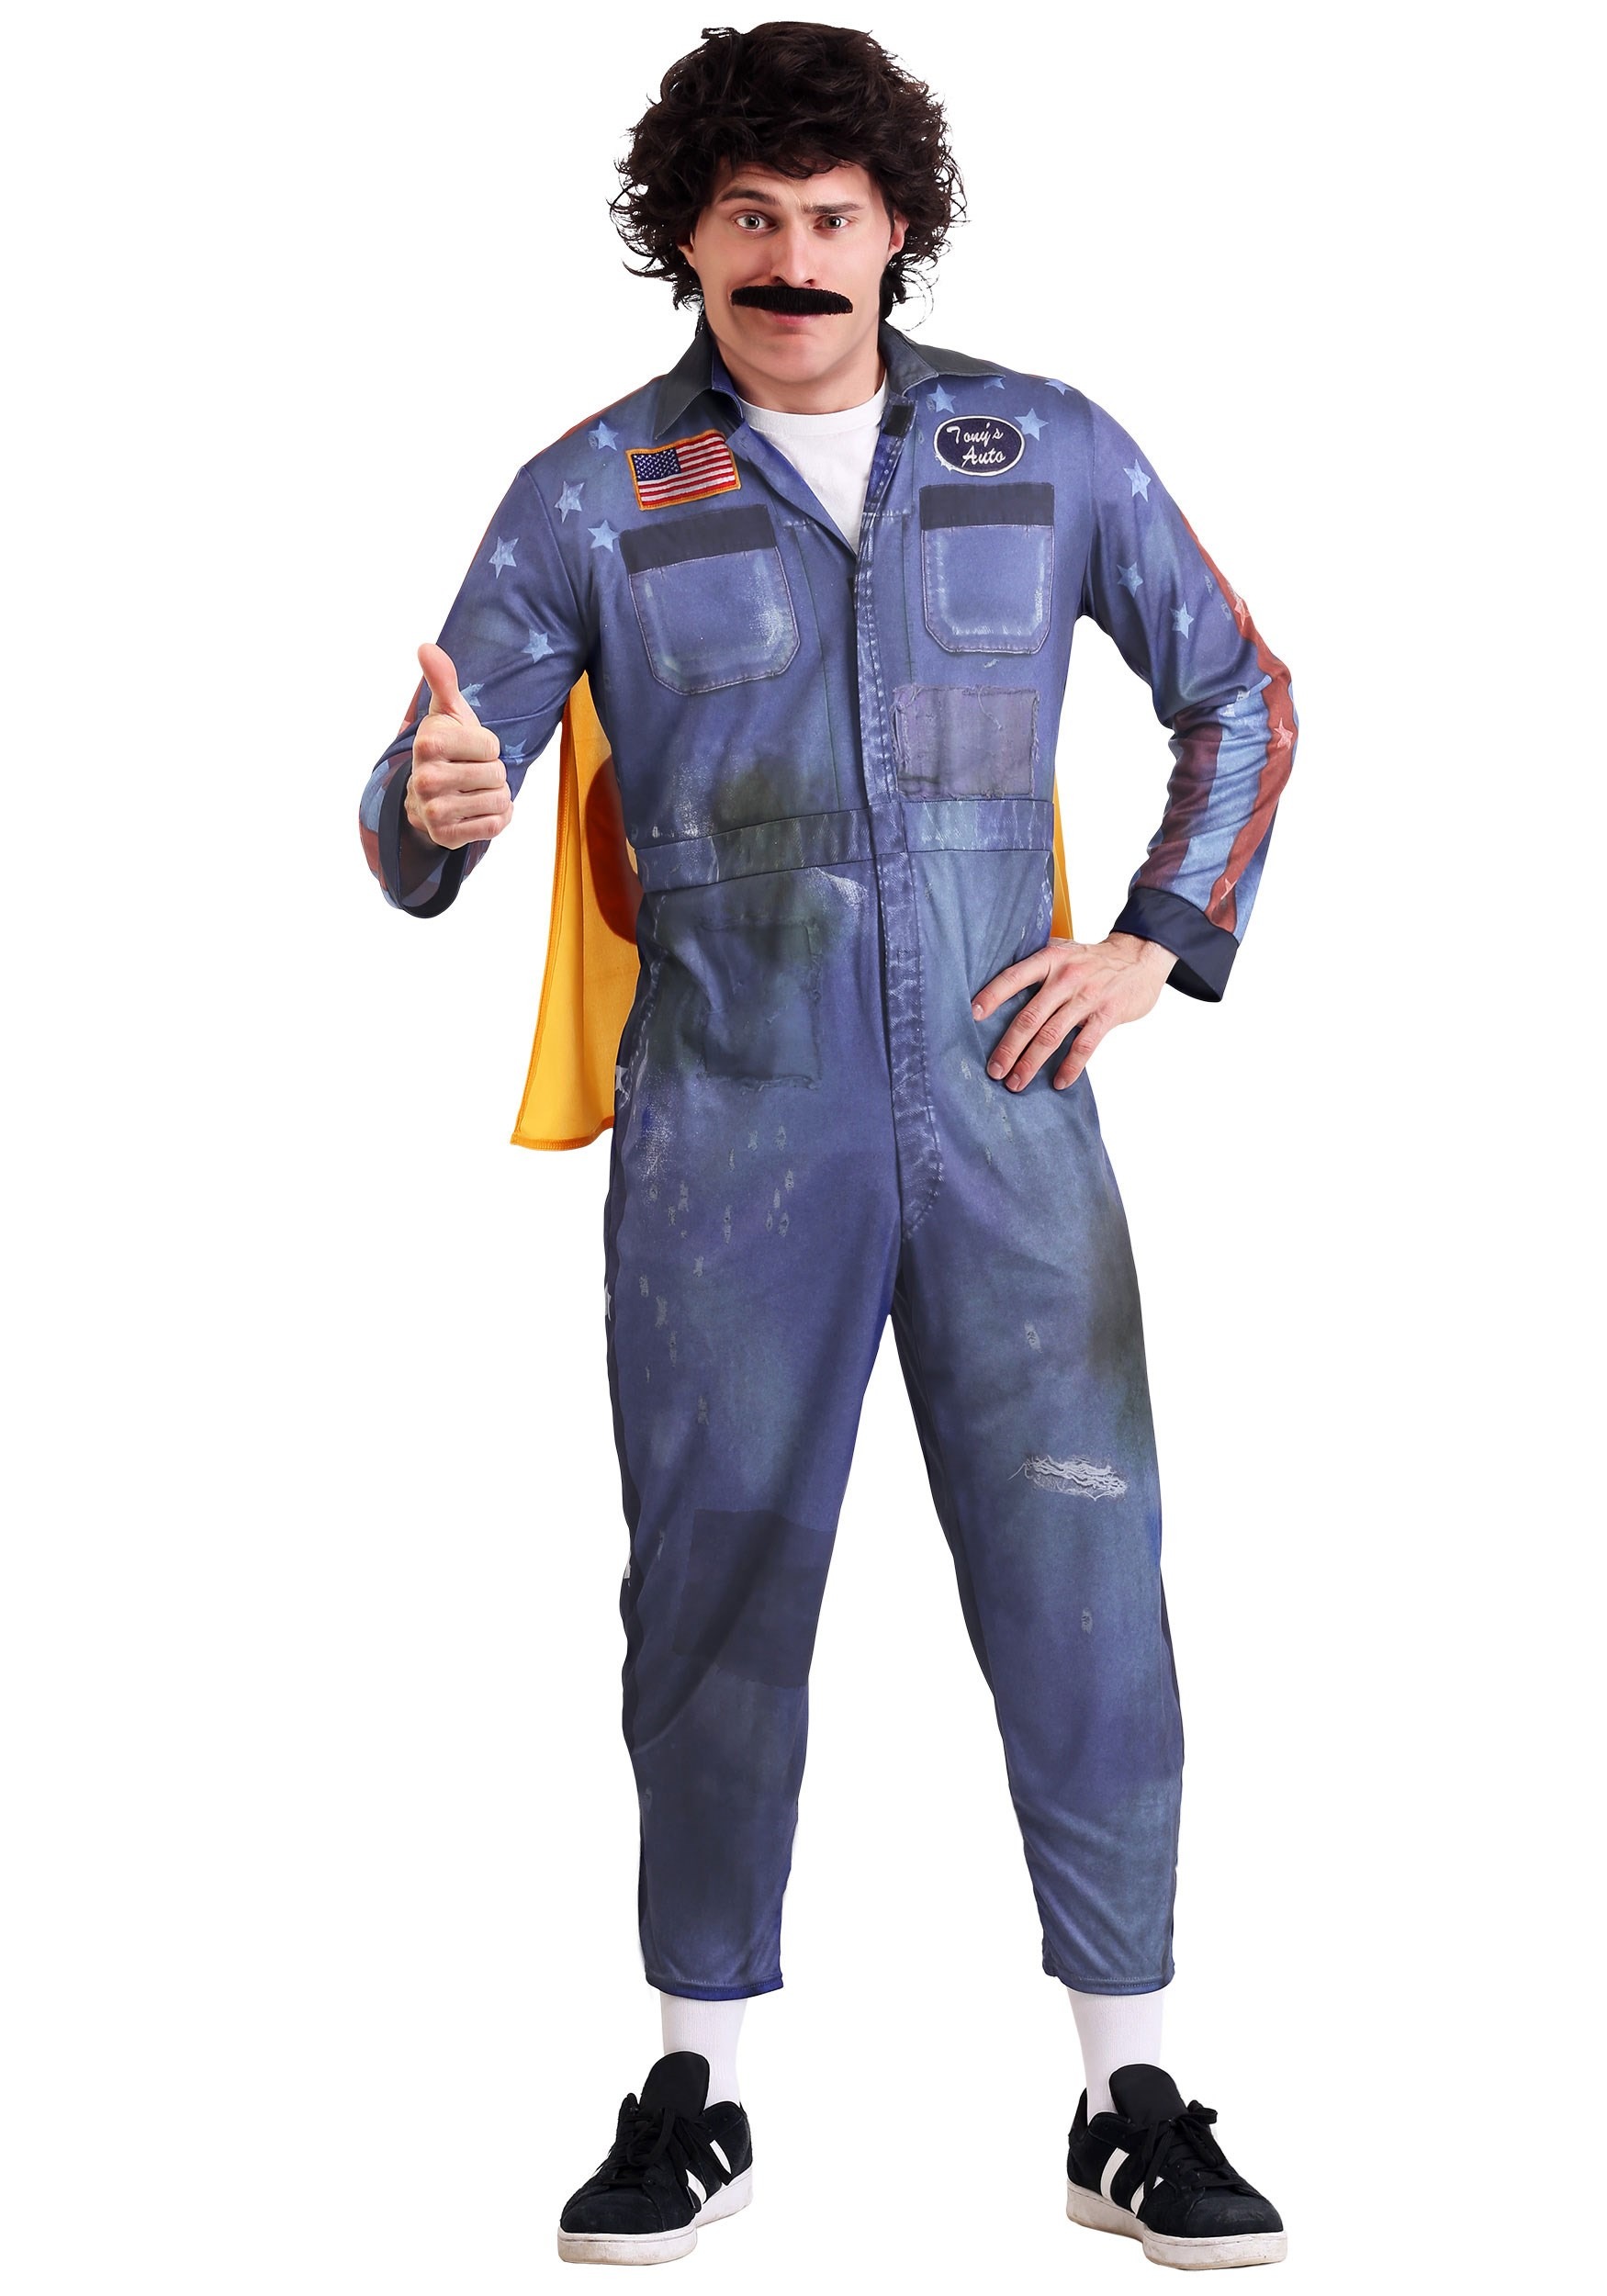 Image of Plus Size Hot Rod Rod Kimble Costume for Adults ID FUN0686PL-3X